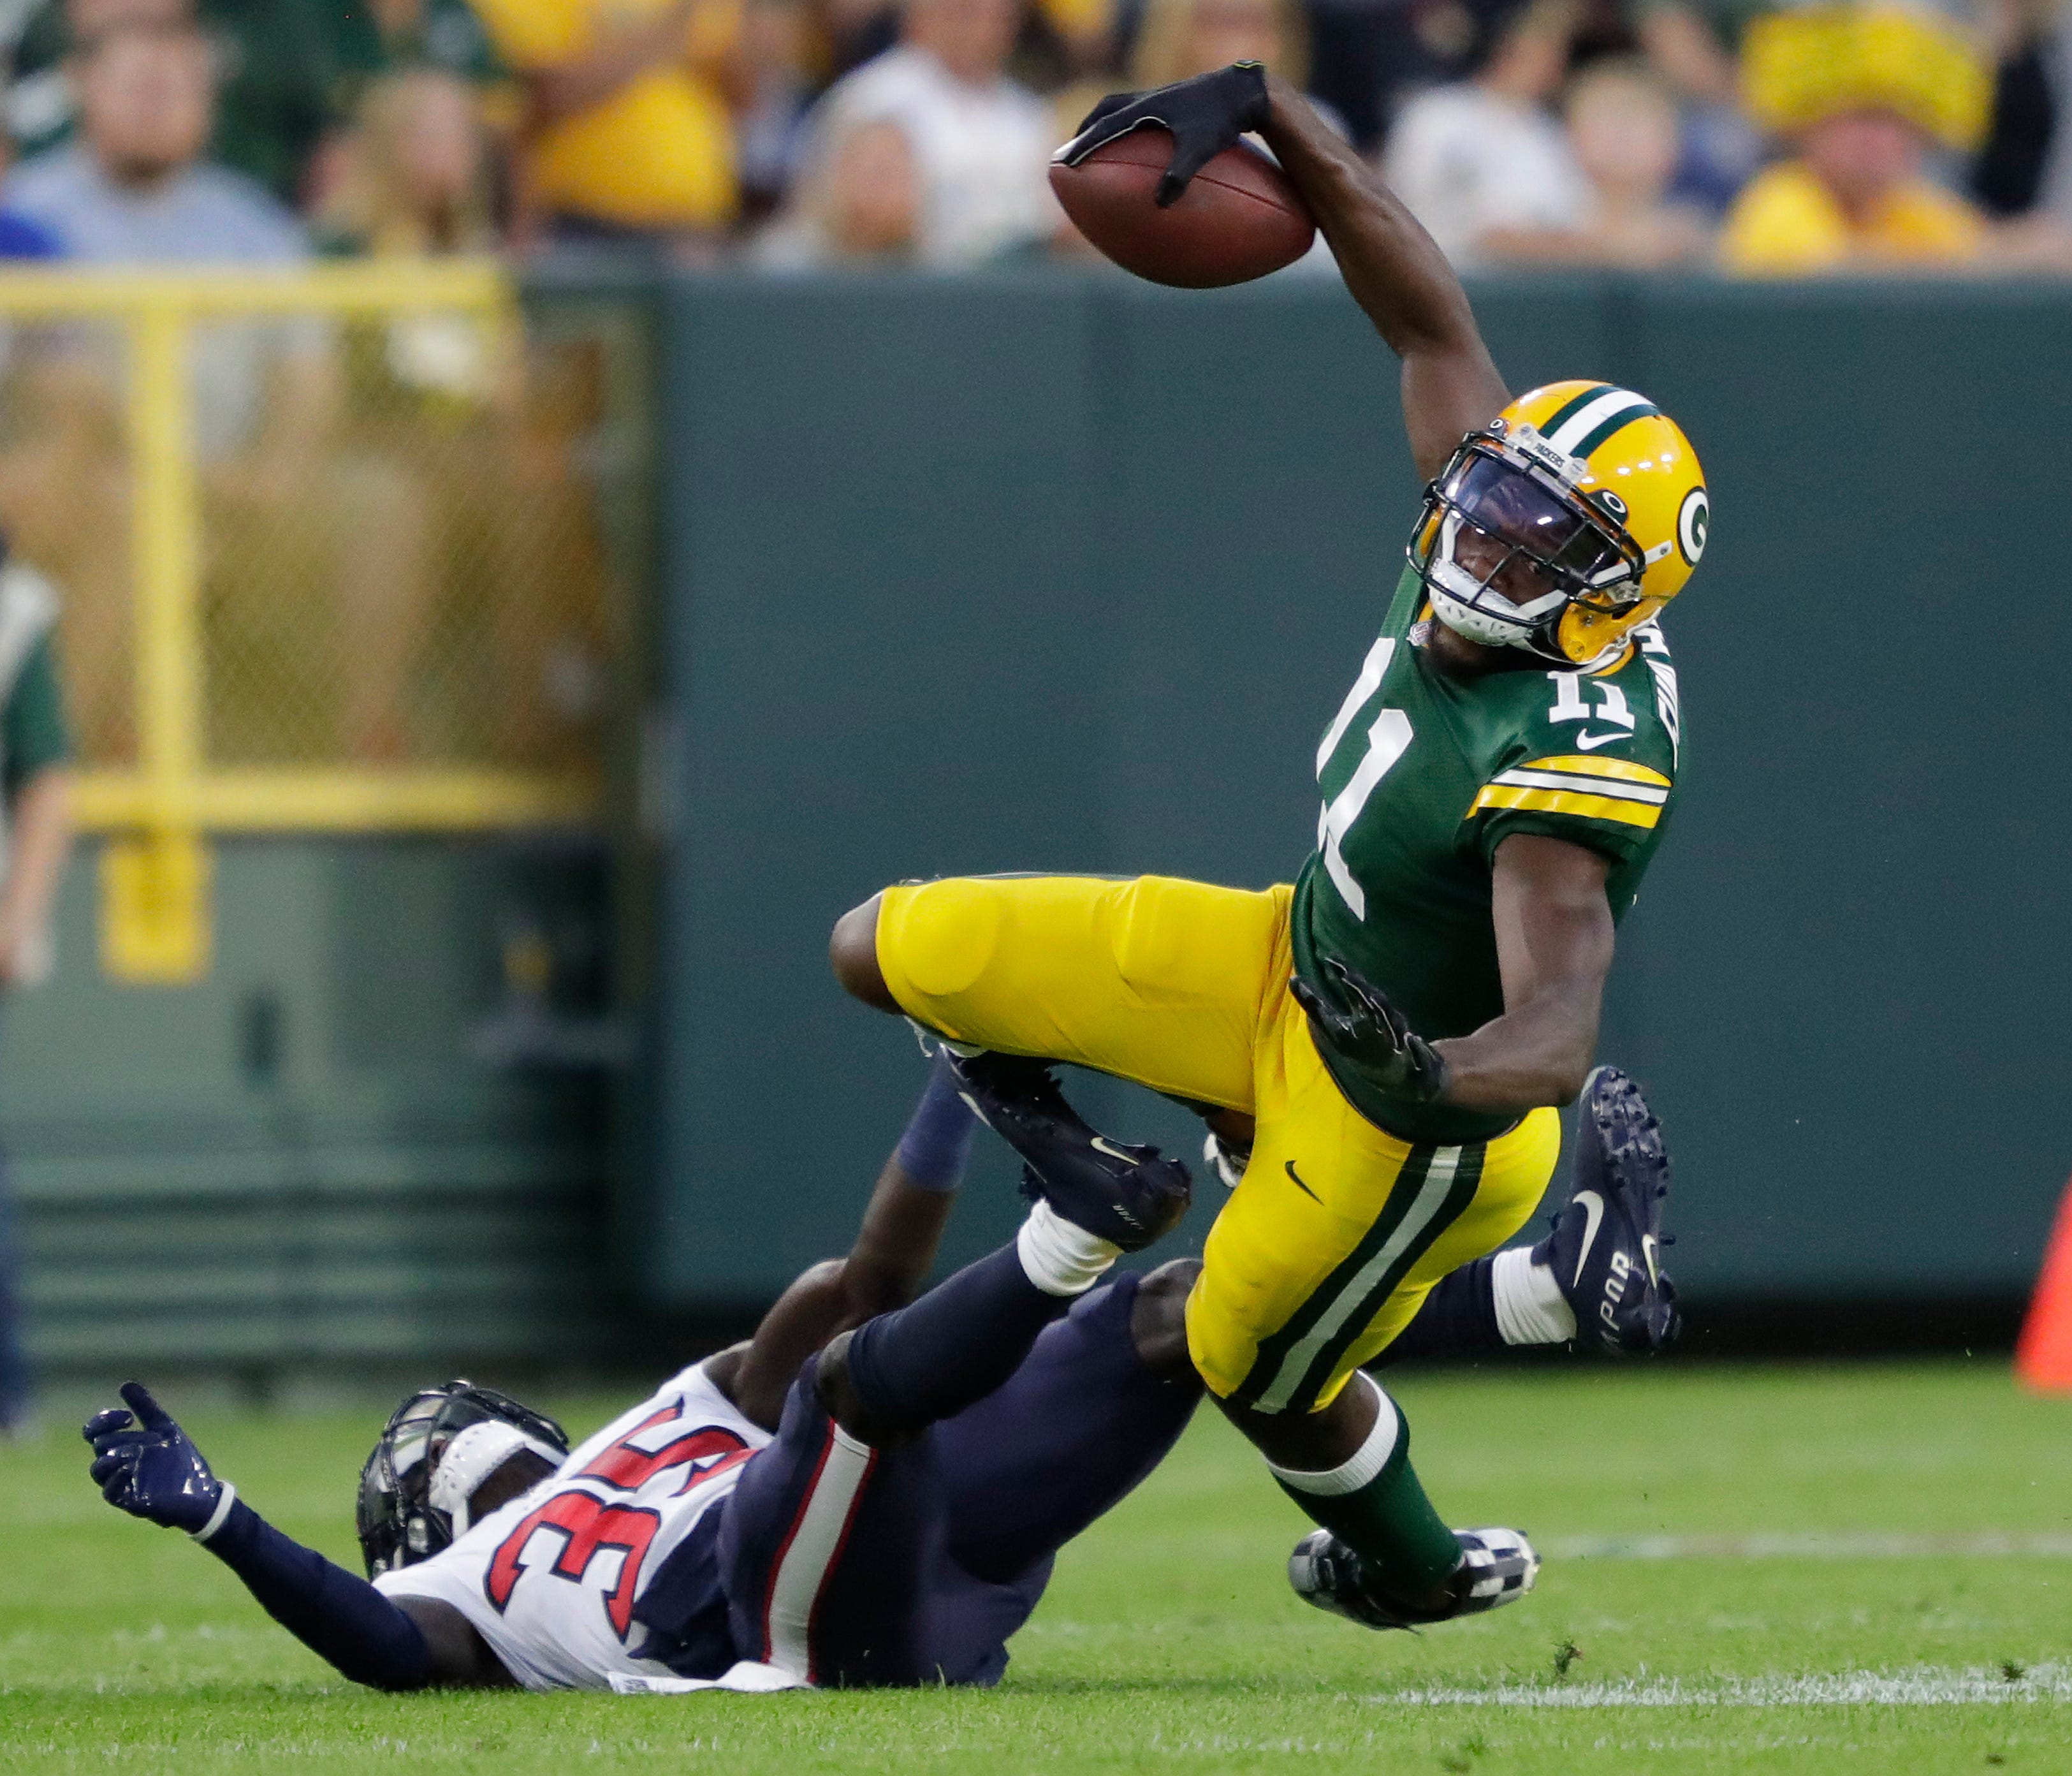 Green Bay Packers wide receiver Devin Funchess (11) pulls down a reception against Houston Texans cornerback Keion Crossen (35) during a preseason game on Saturday, Aug. 14, 2021, at Lambeau Field in Green Bay.